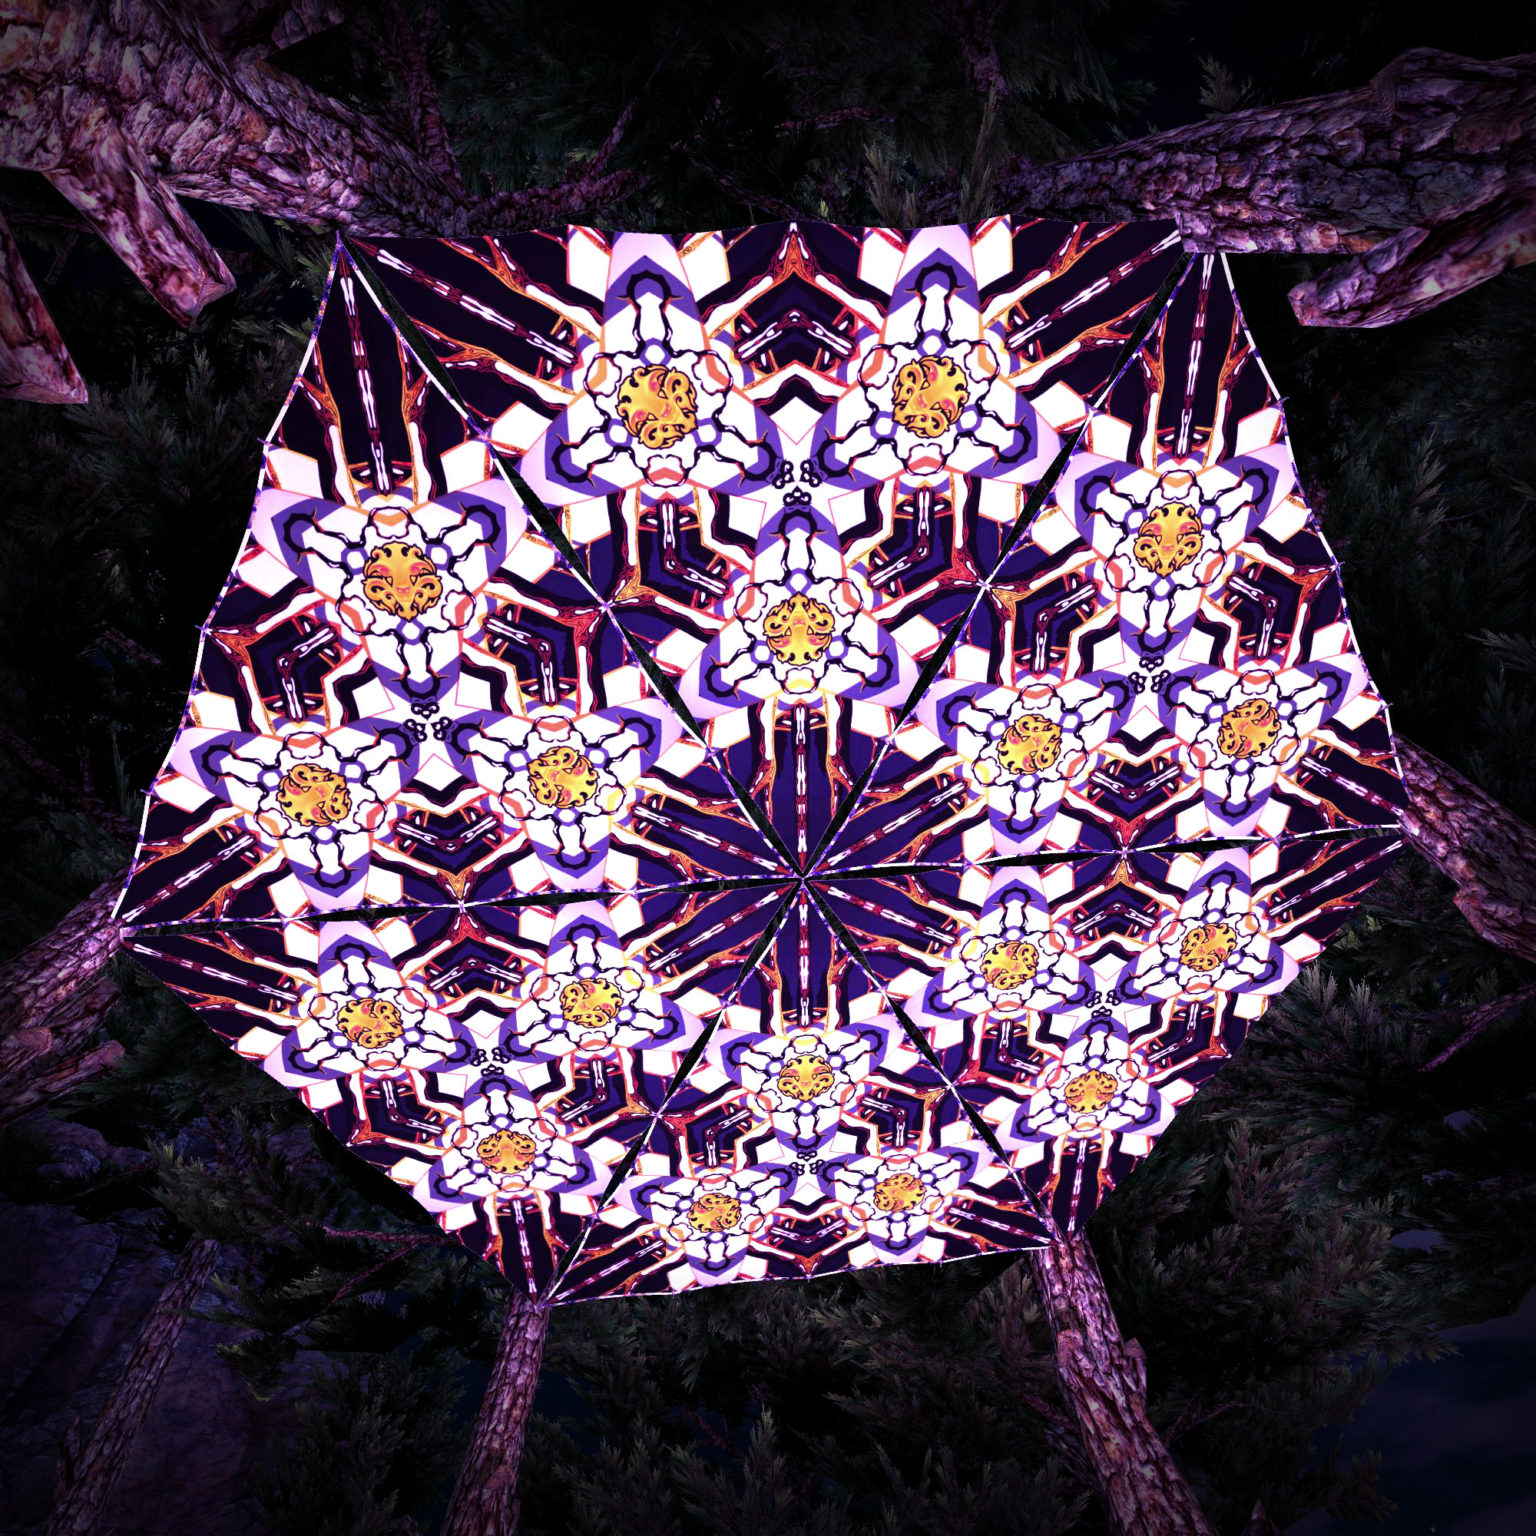 Winter Tale UV-Triangles WT-TR03 - 6 Pieces - UV-Reactive Psychedelic Party Decoration - 3D Preview